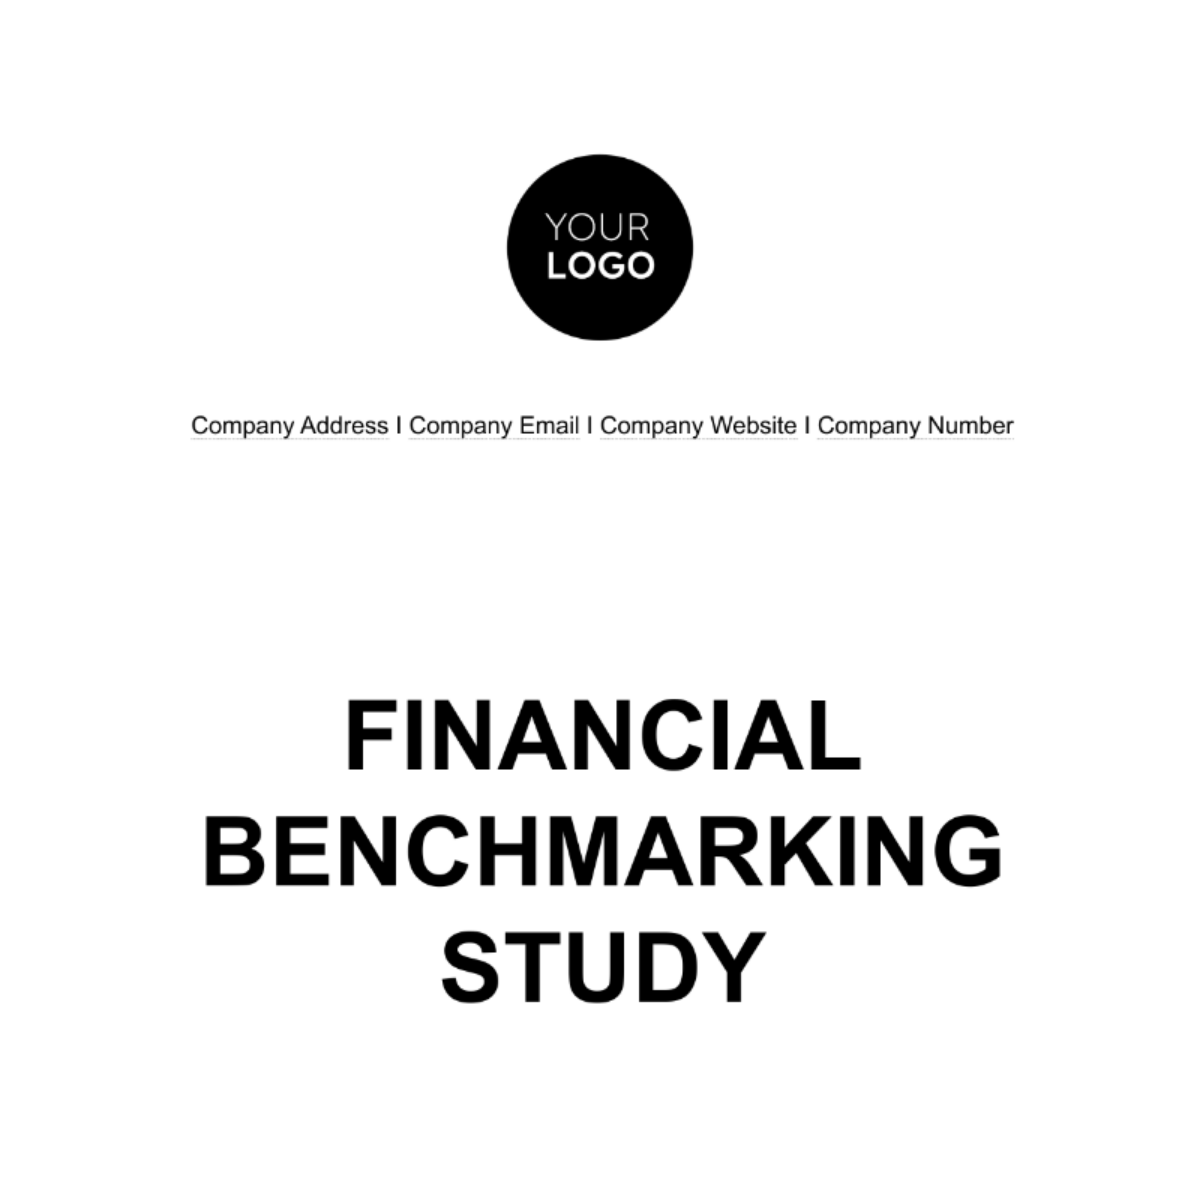 Free Financial Benchmarking Study Template